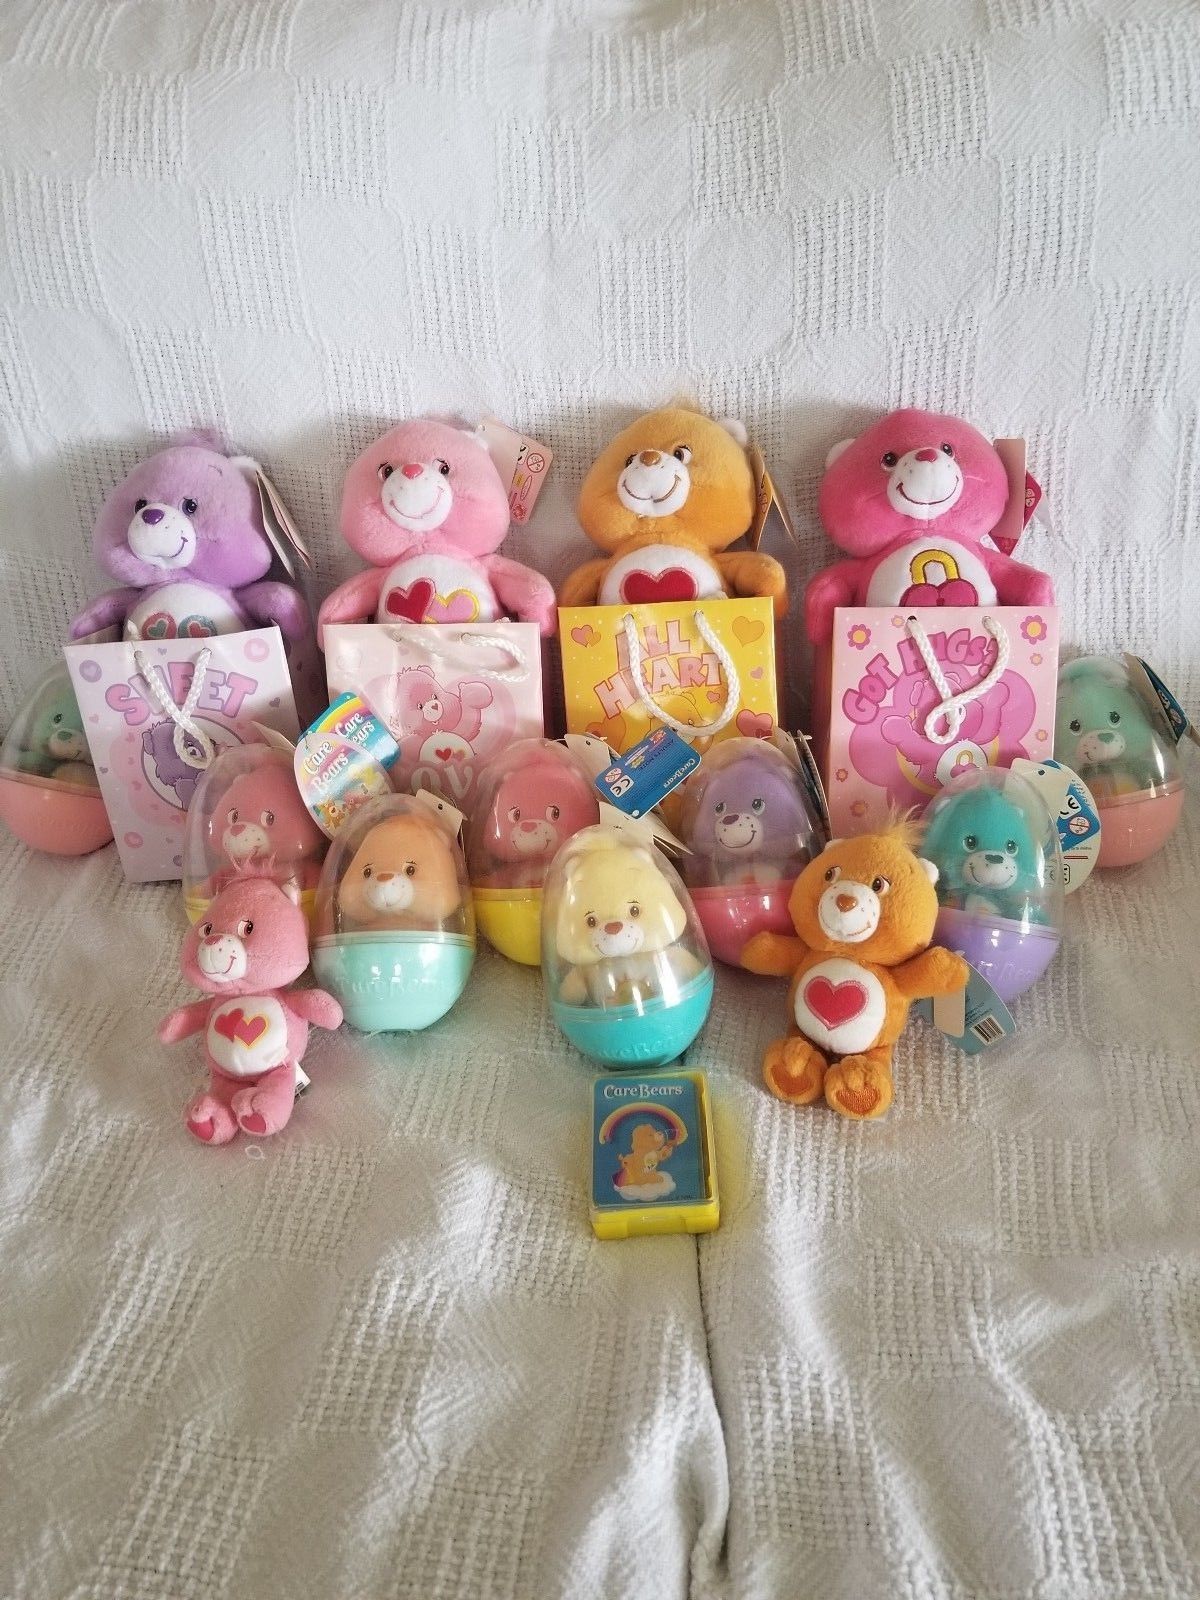 Care Bears Lot of 15 Small Bears! Easter Egg and Valentines Care Bears! 